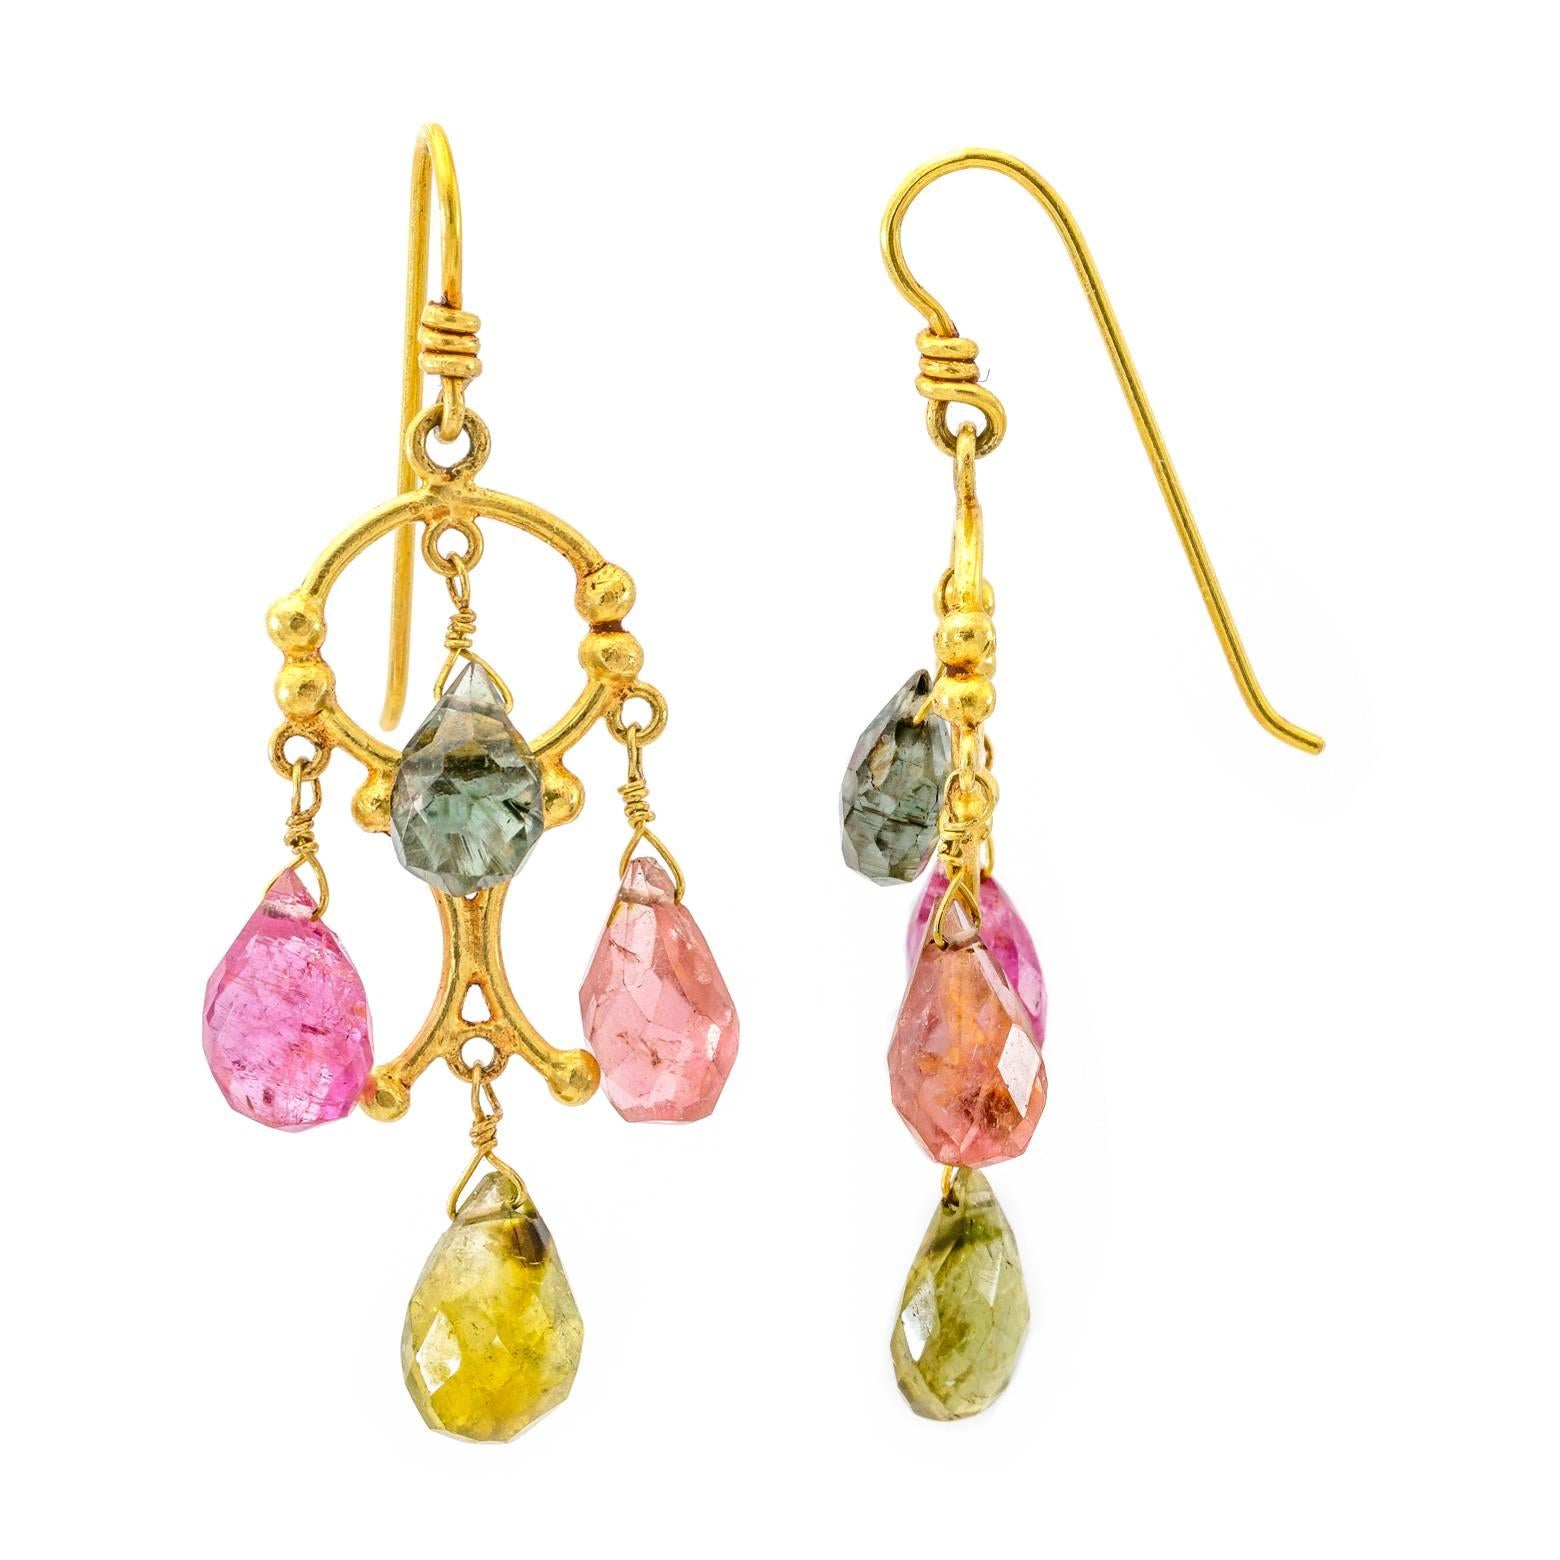 Summery warm pink and green tones dangle from intricately designed 18K yellow gold. These tourmaline briolettes come in four different shades from light pink to dark forest green. They dangle and swing with the gentle tinkling sound of 